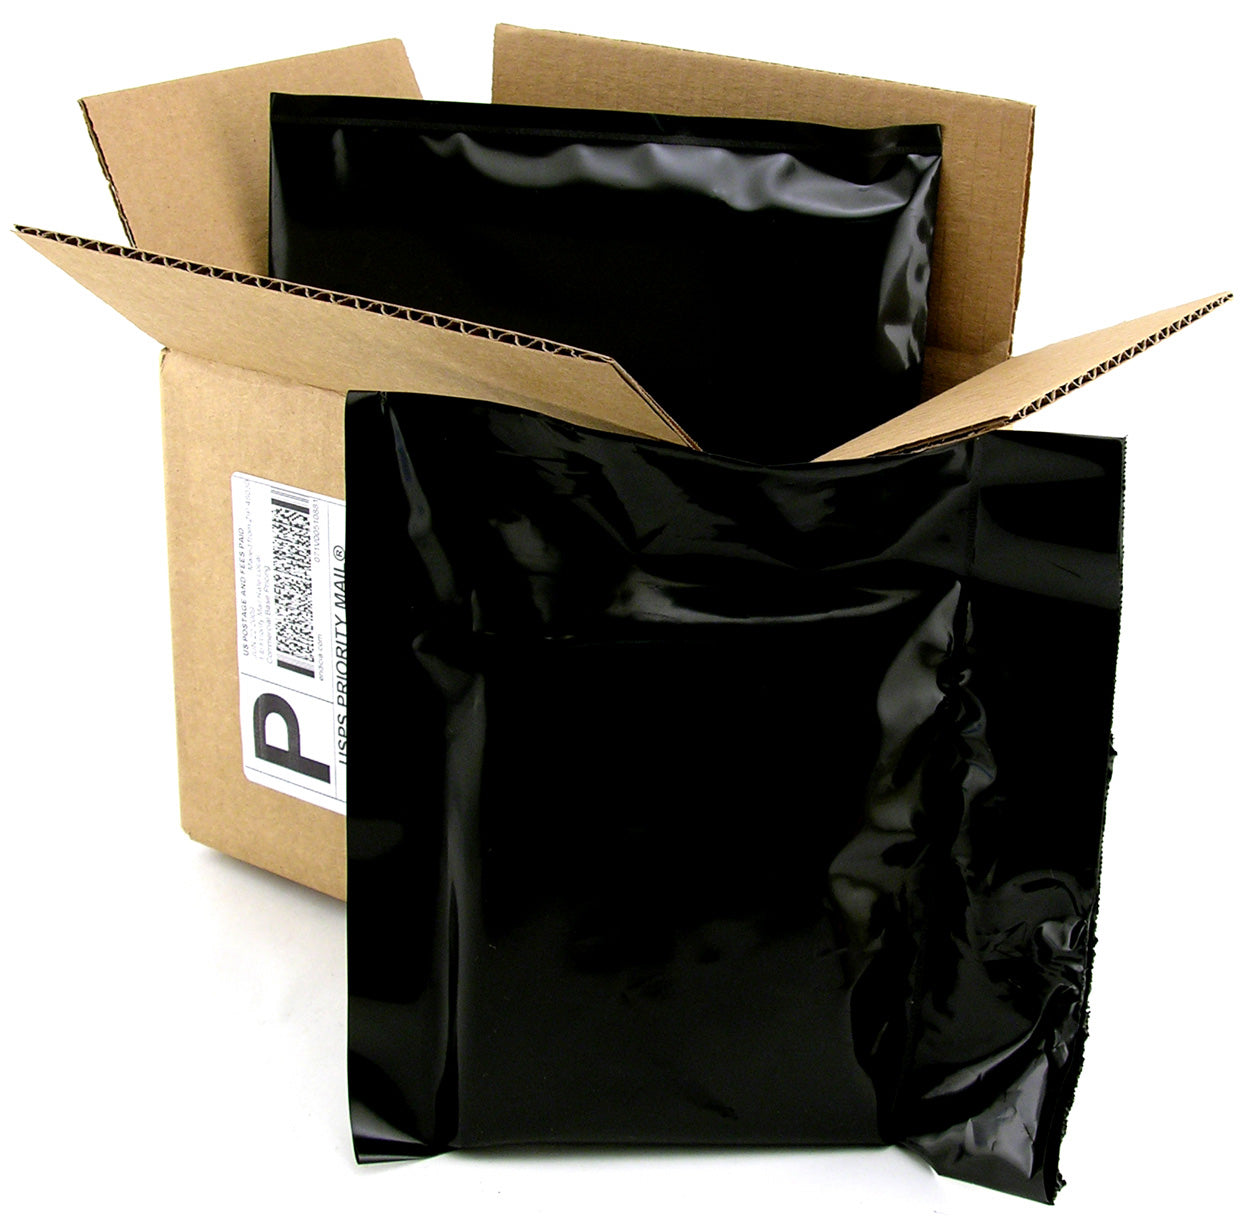 Nosy Neighbors Will Never Know - Extra Private Packaging by PriveCo - June 25th, 2009